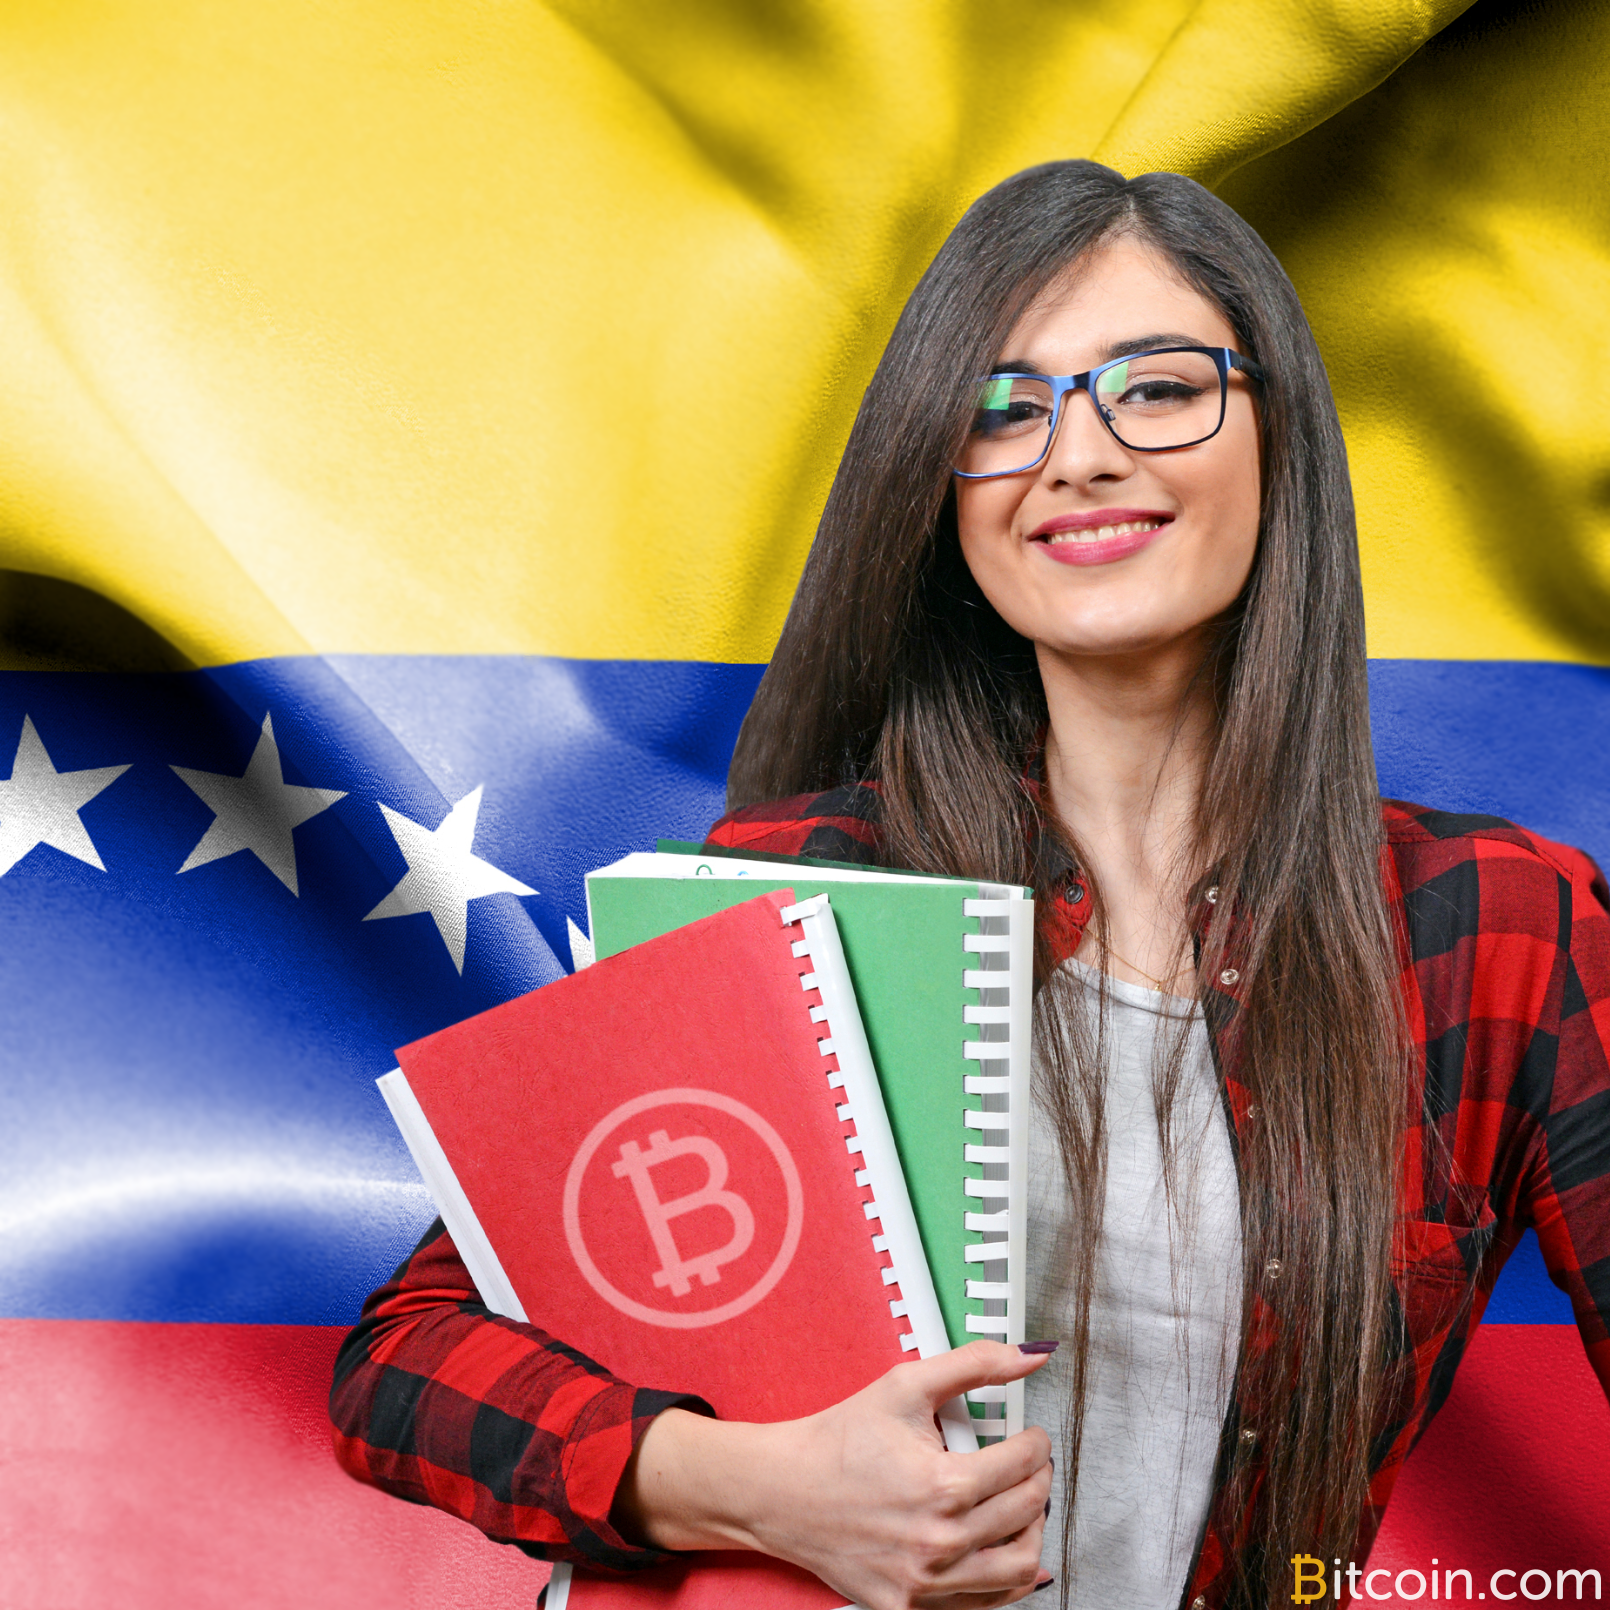 Venezuelan Government Opens School to Teach Citizens About Cryptocurrencies